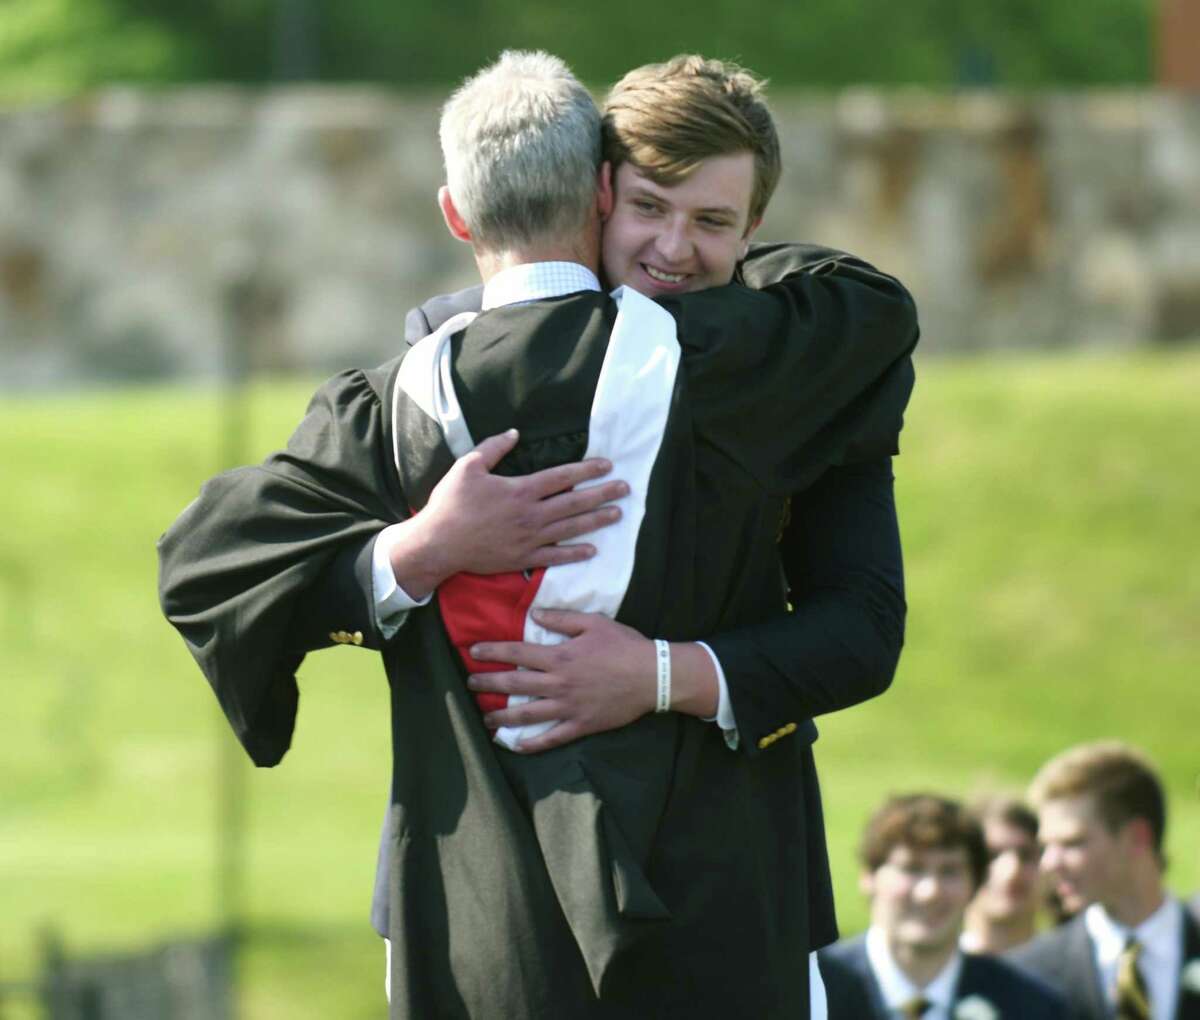 Boland Faughnan hugs Head of School Thomas Philip while receiving his diploma at the 2021 commencement ceremony at Brunswick School in Greenwich, Conn. Wednesday, May 19, 2021. 104 students graduated during the outdoor ceremony at Cosby Field, featuring a virtual commencement speech by Connecticut Gov. Ned Lamont.